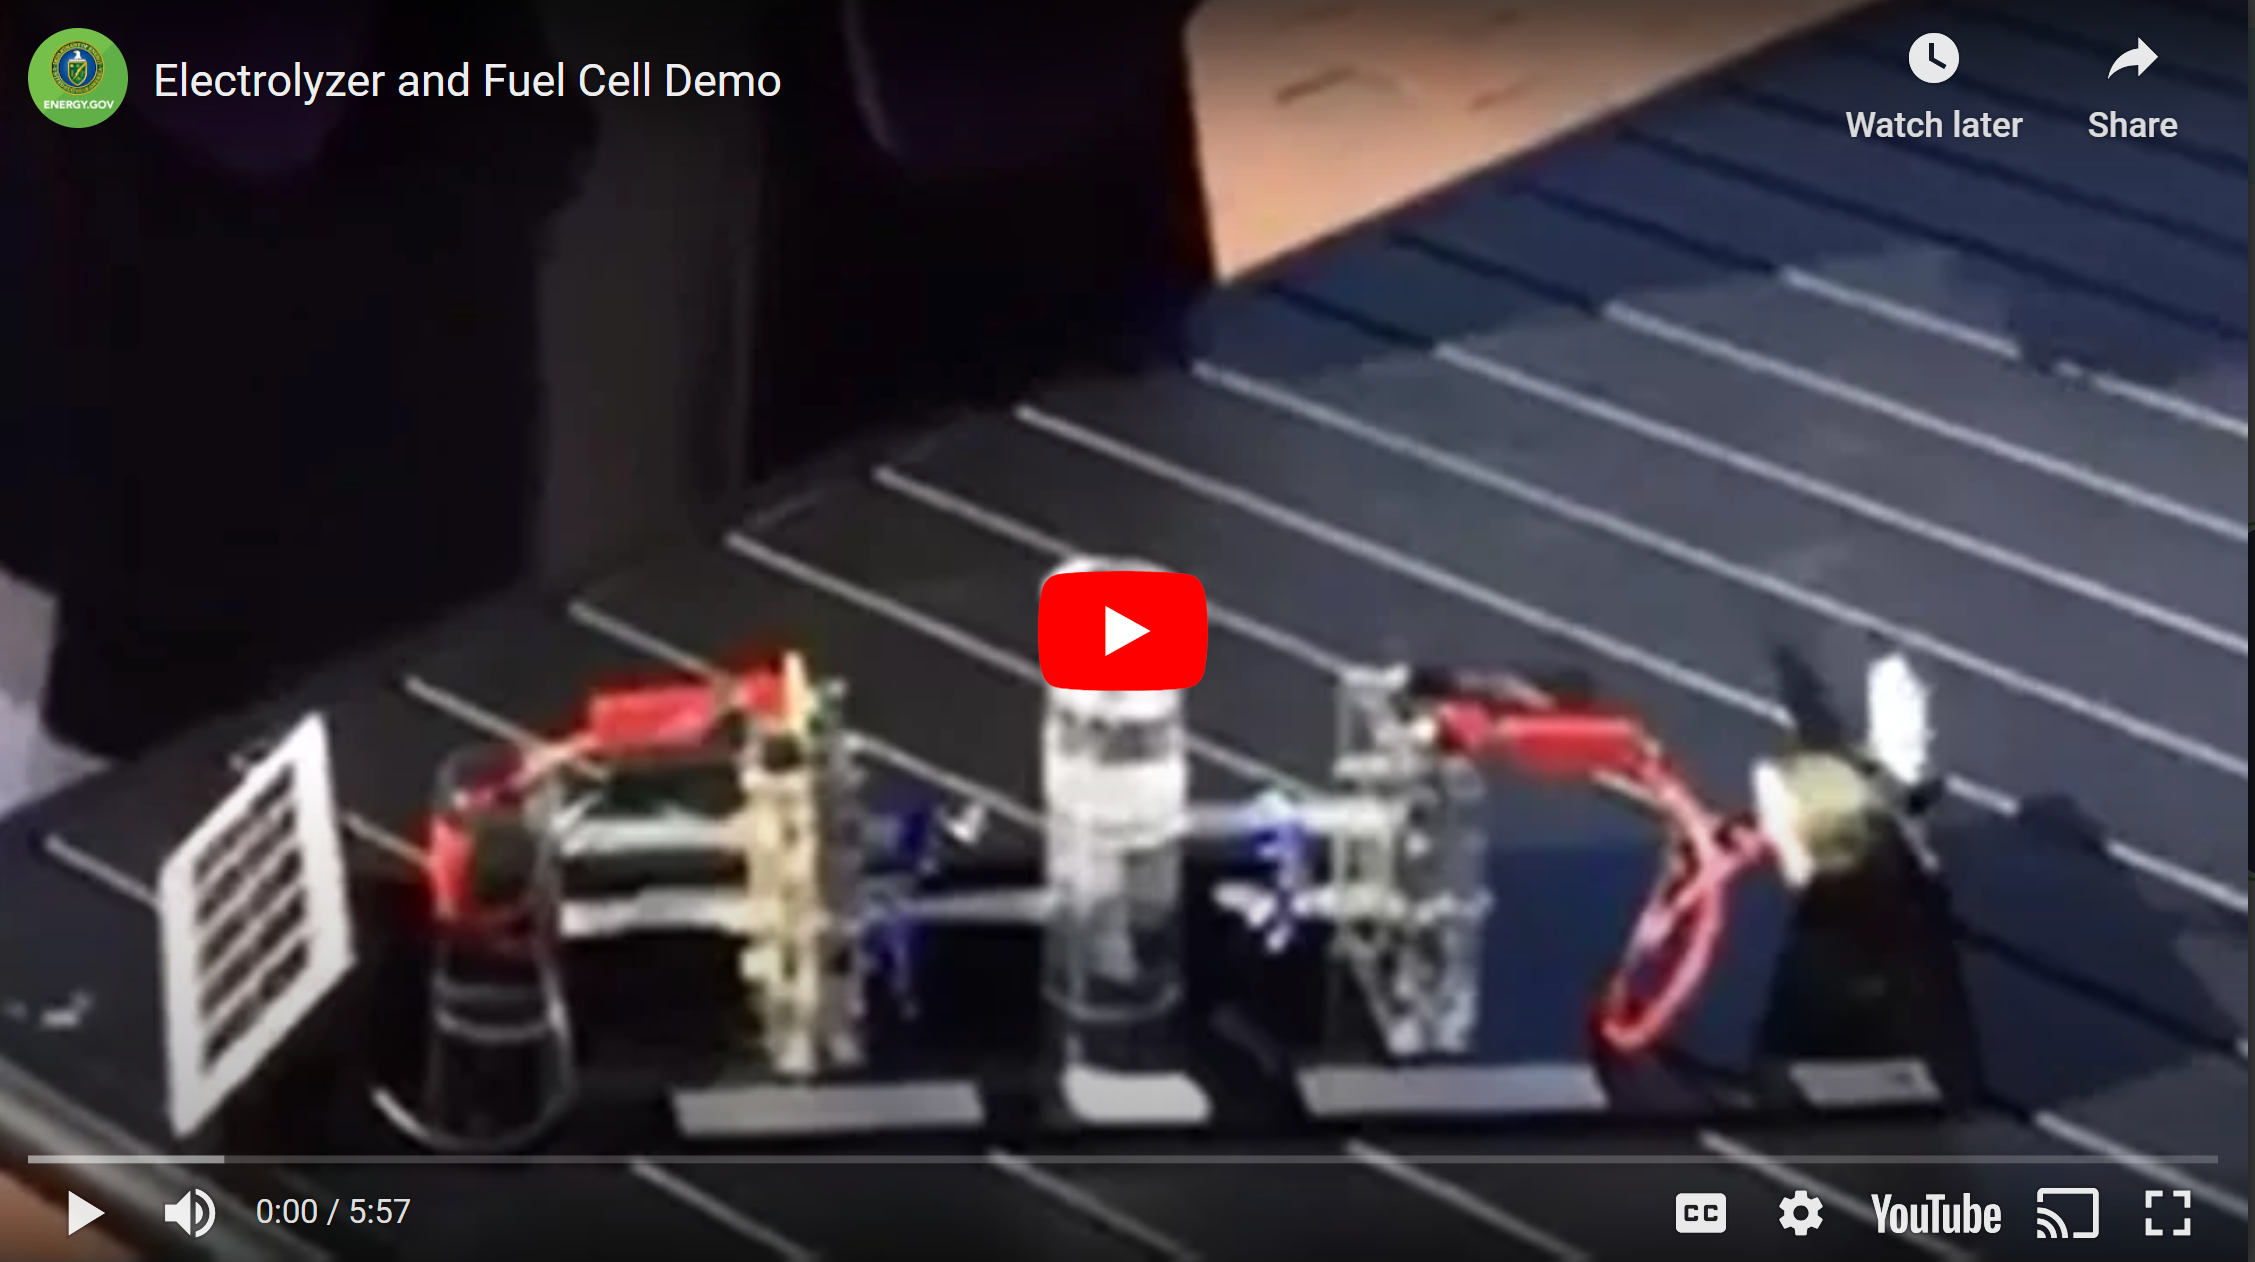 Electrolyzer and Fuel Cell Demo